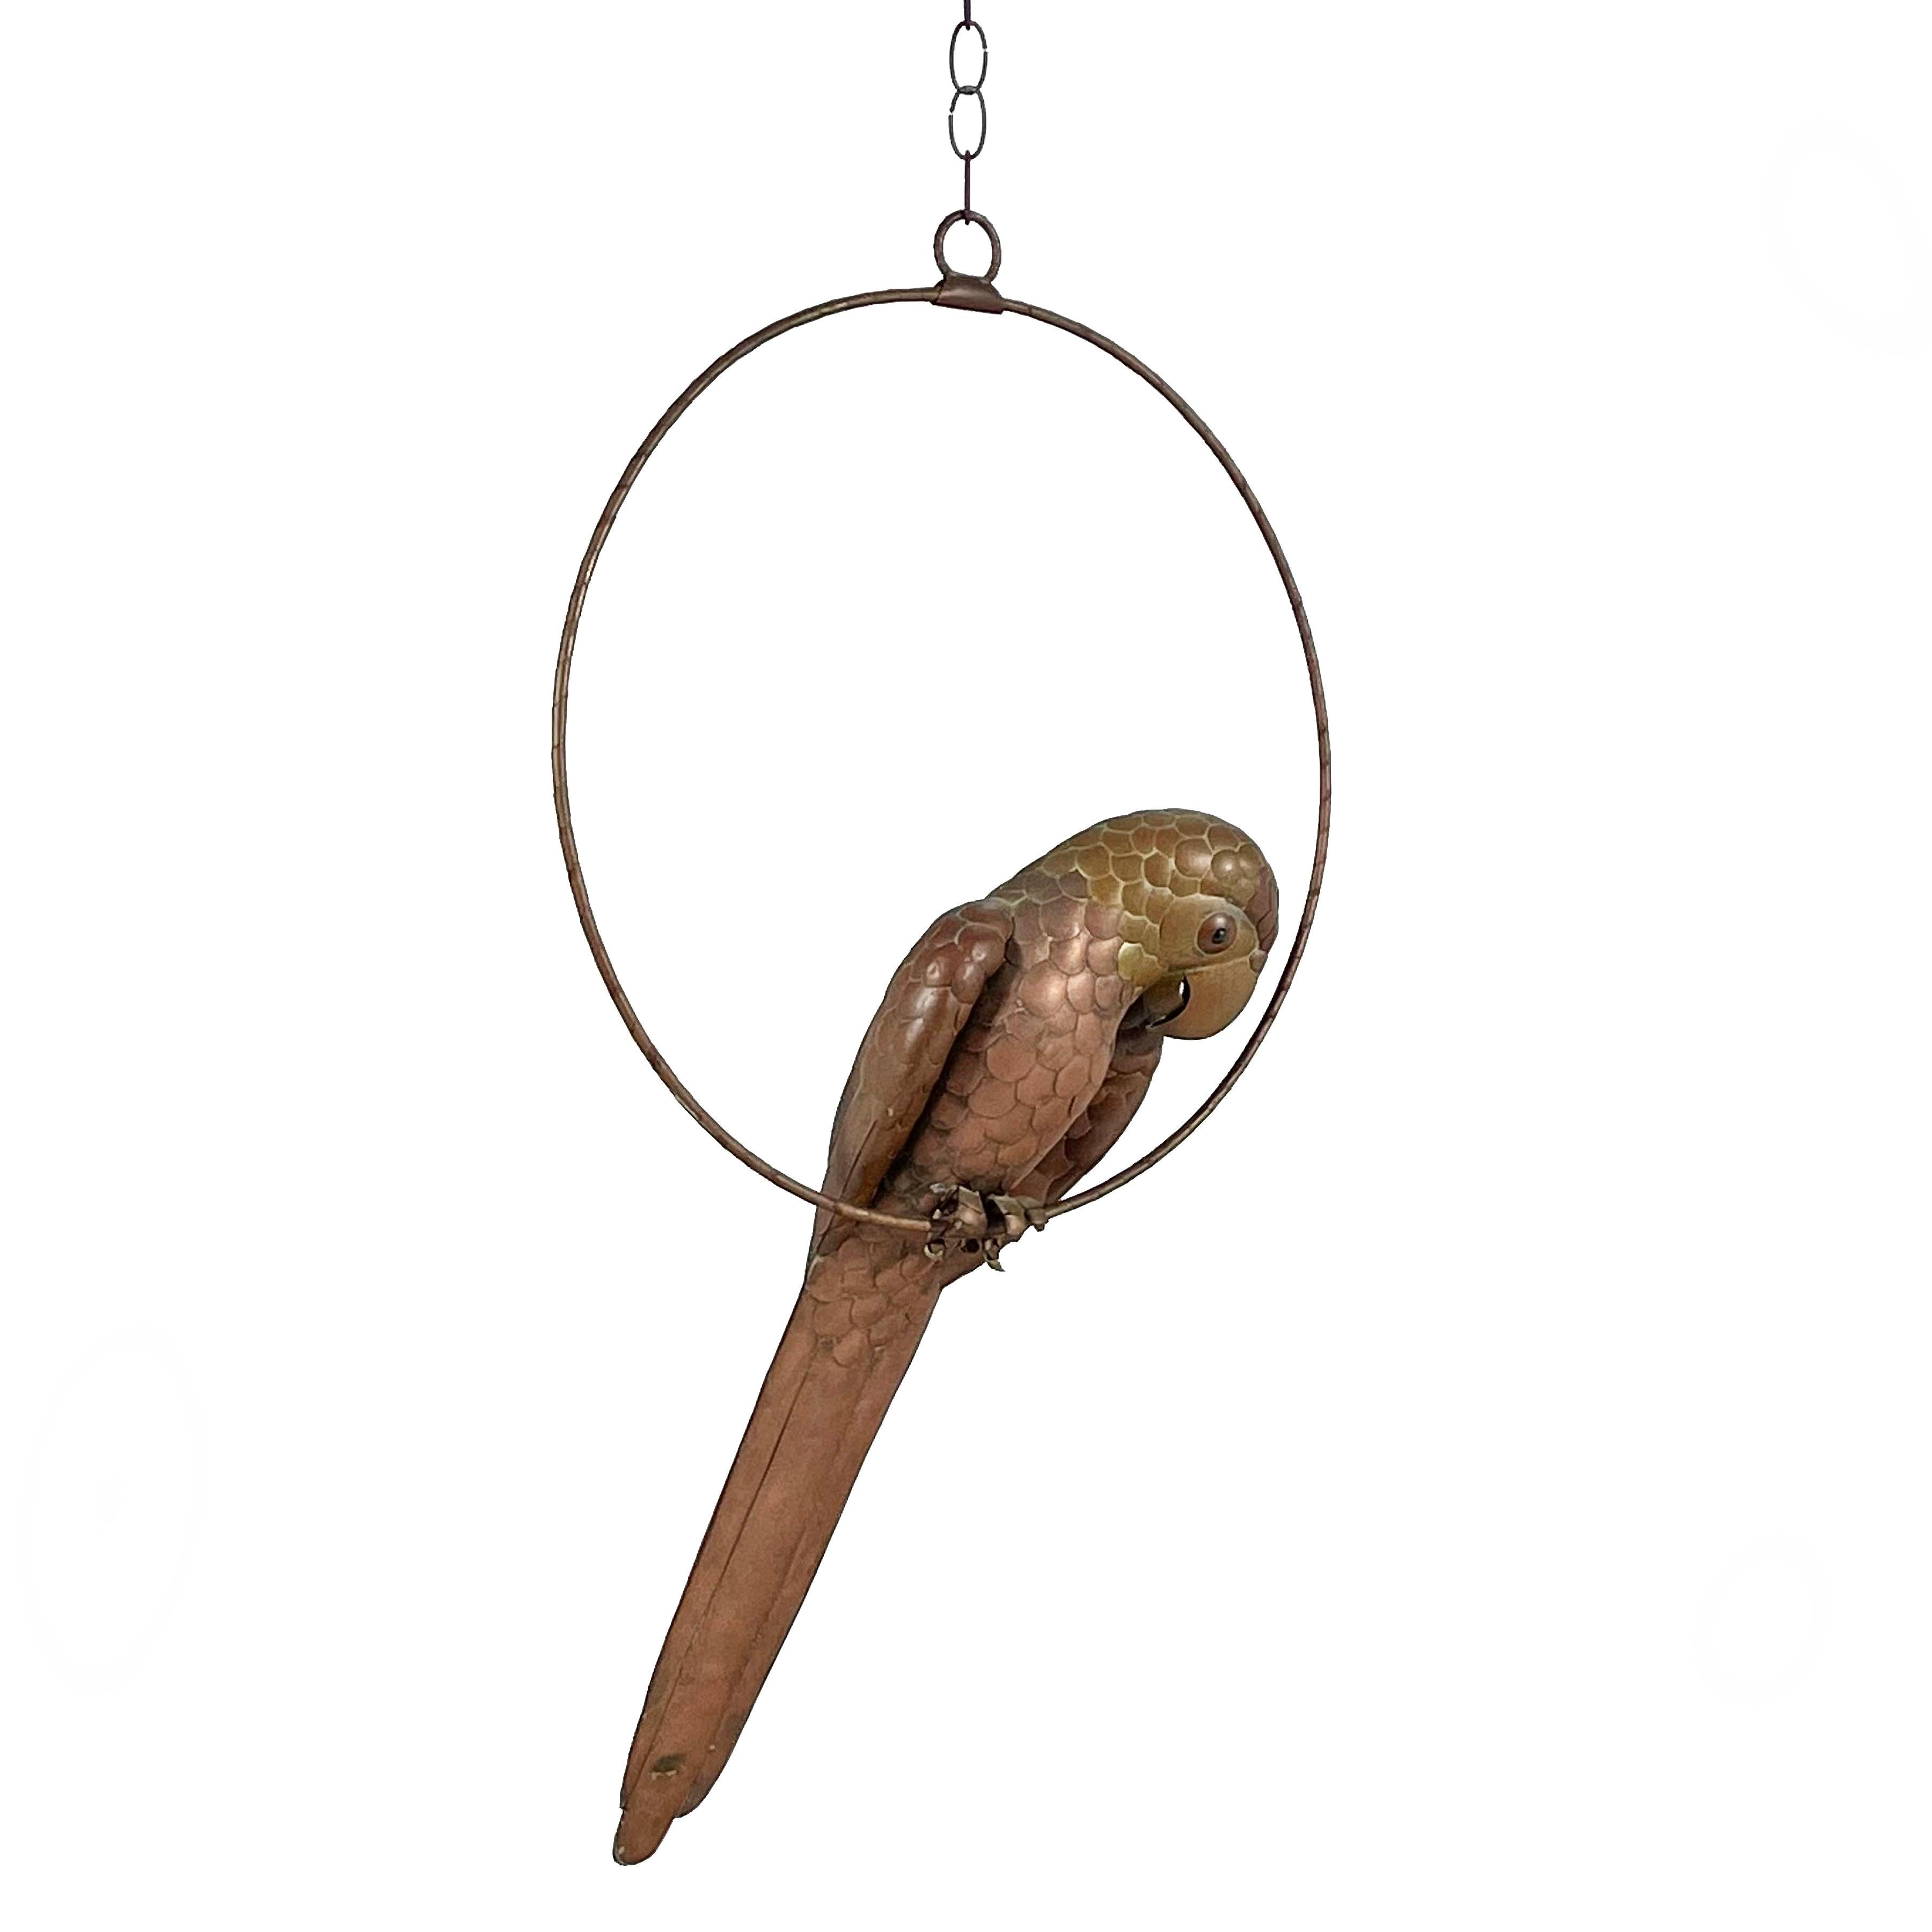 Bustamante's playful animals are imbued with character regardless of the materials they are made with. This parrot in copper and brass makes the perfect companion sitting on his perch surveying his surroundings. Beautifully detailed and having